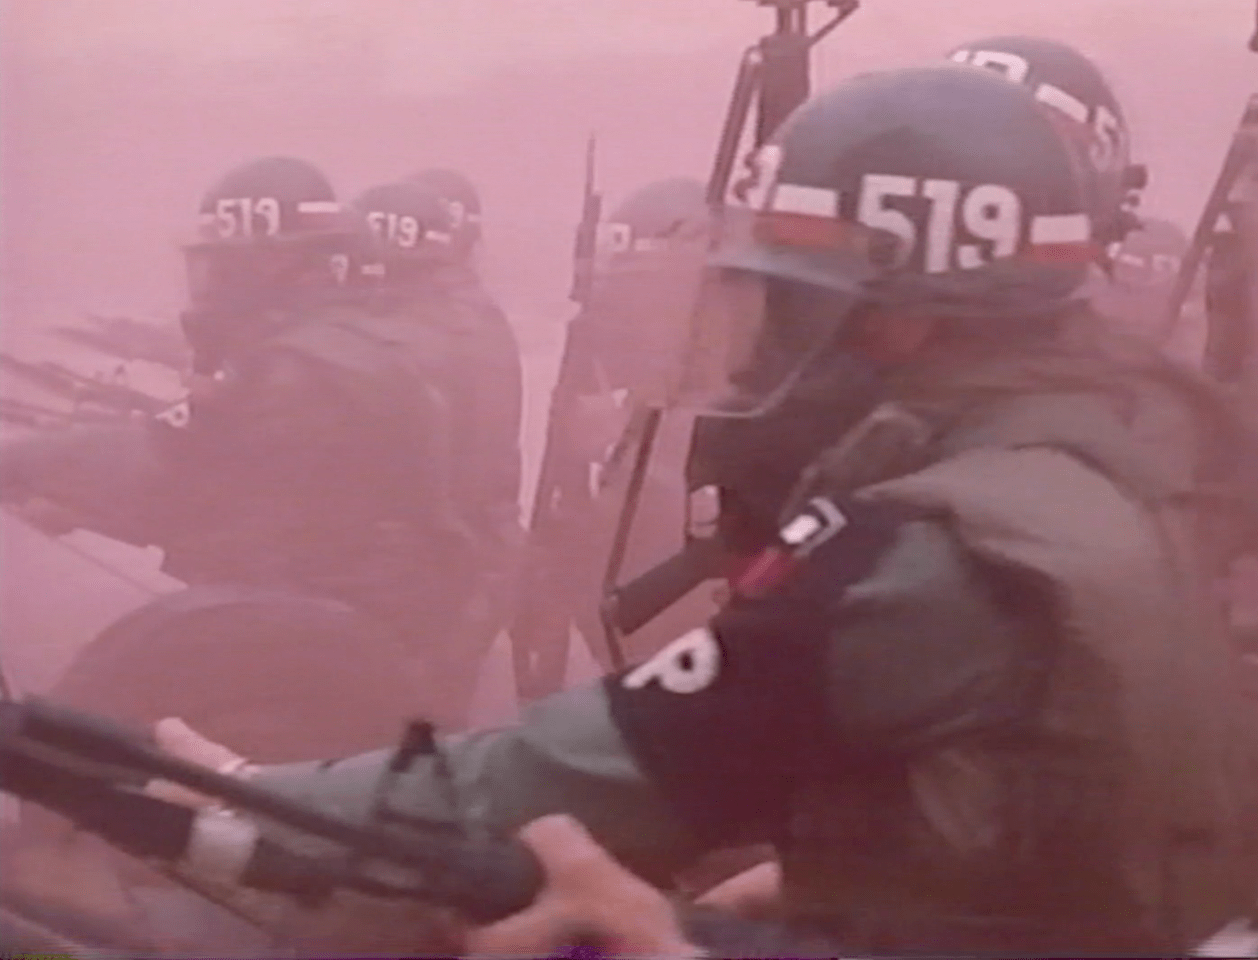 Blurry image of military policeman enveloped in a pink cloud of smoke